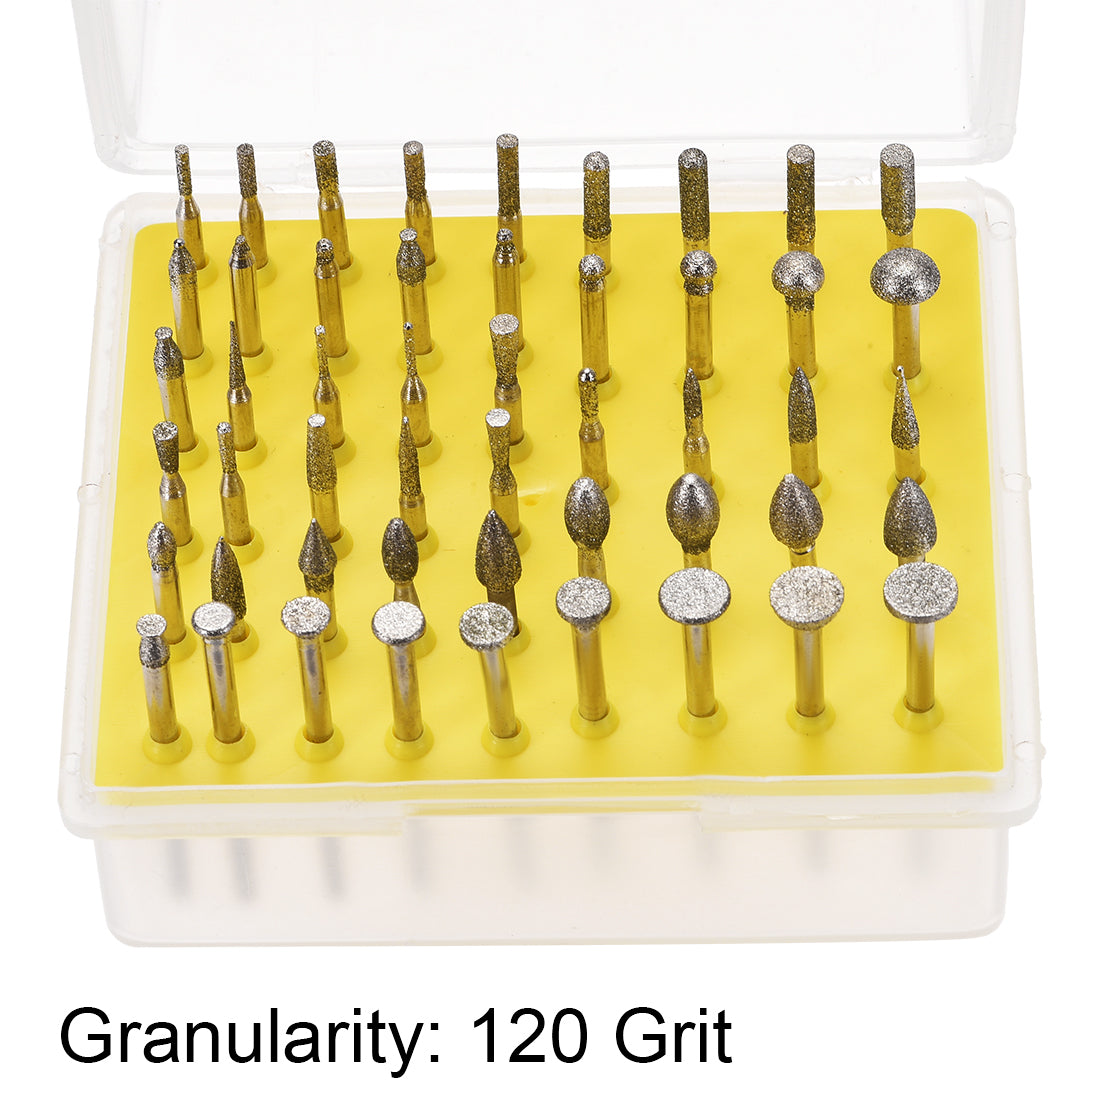 uxcell Uxcell Diamond Burrs Set Grinding Drill Bits for Carving Rotary Tool 1/8-Inch Shank Small Head 120 Grit 50 Pcs